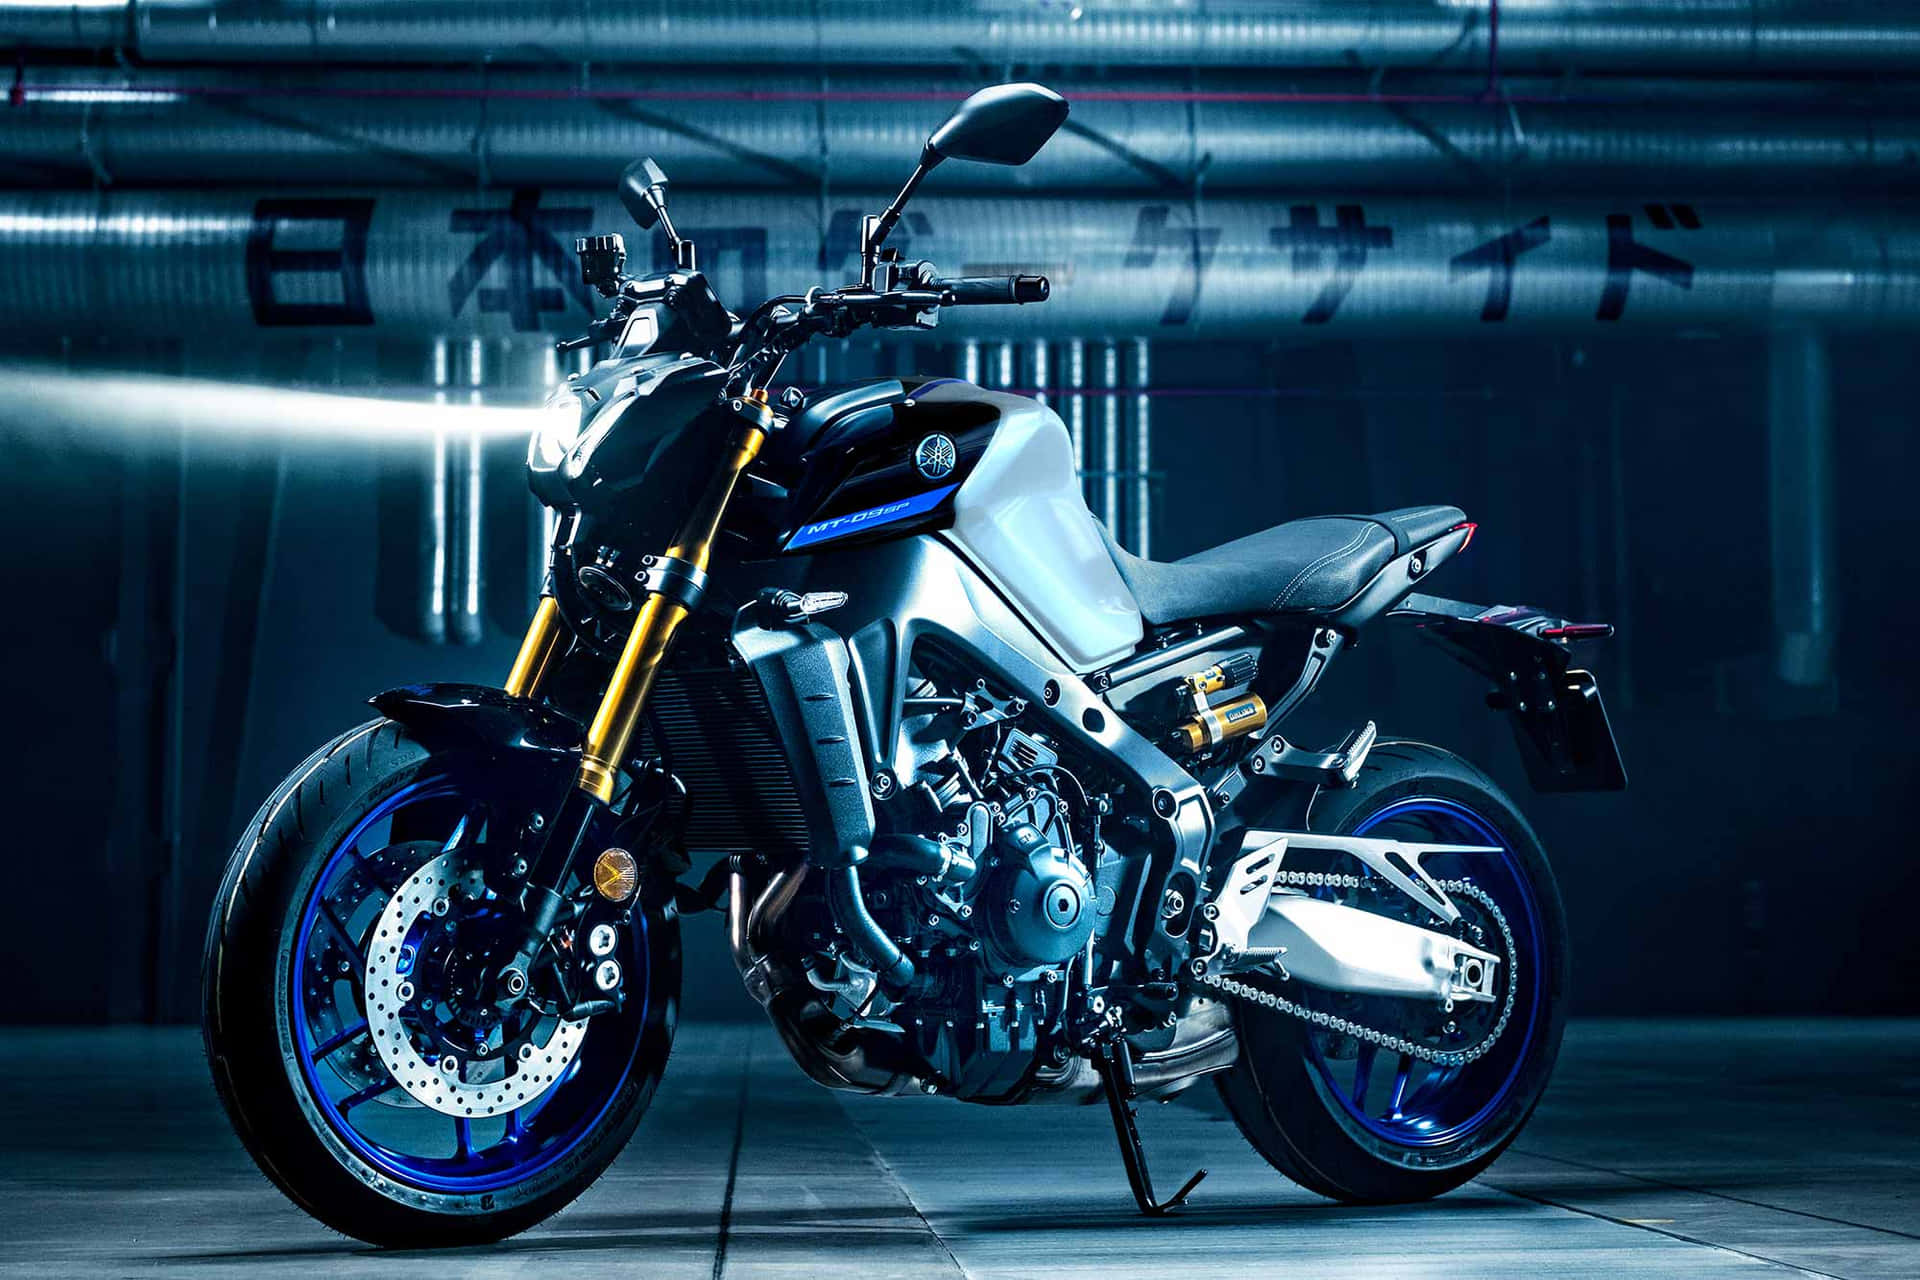 Caption: Exquisite Yamaha Motorcycle In Action Wallpaper